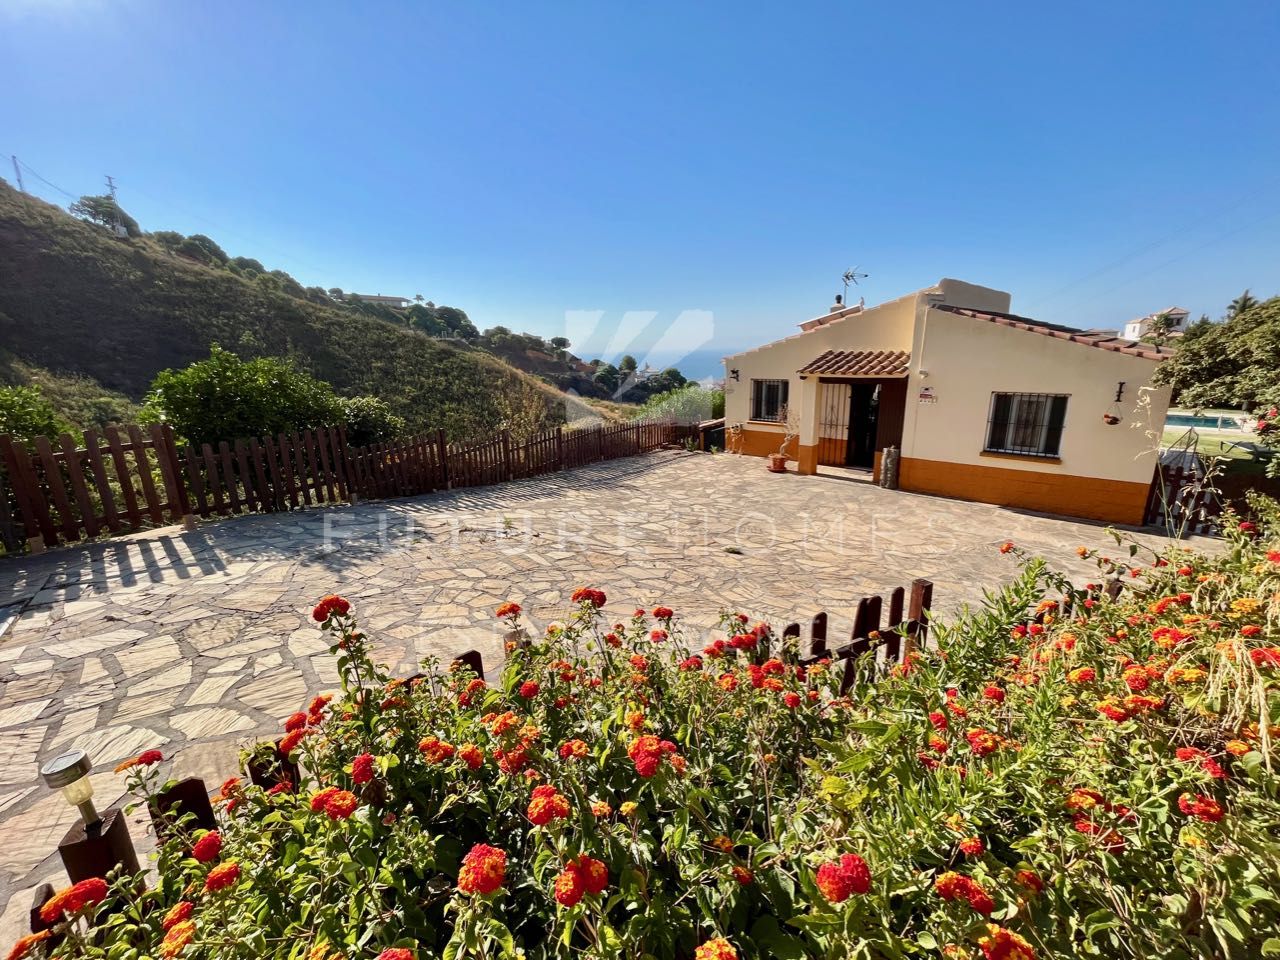 Well priced country villa located in the popular area of Los Reales in Estepona with country and sea views